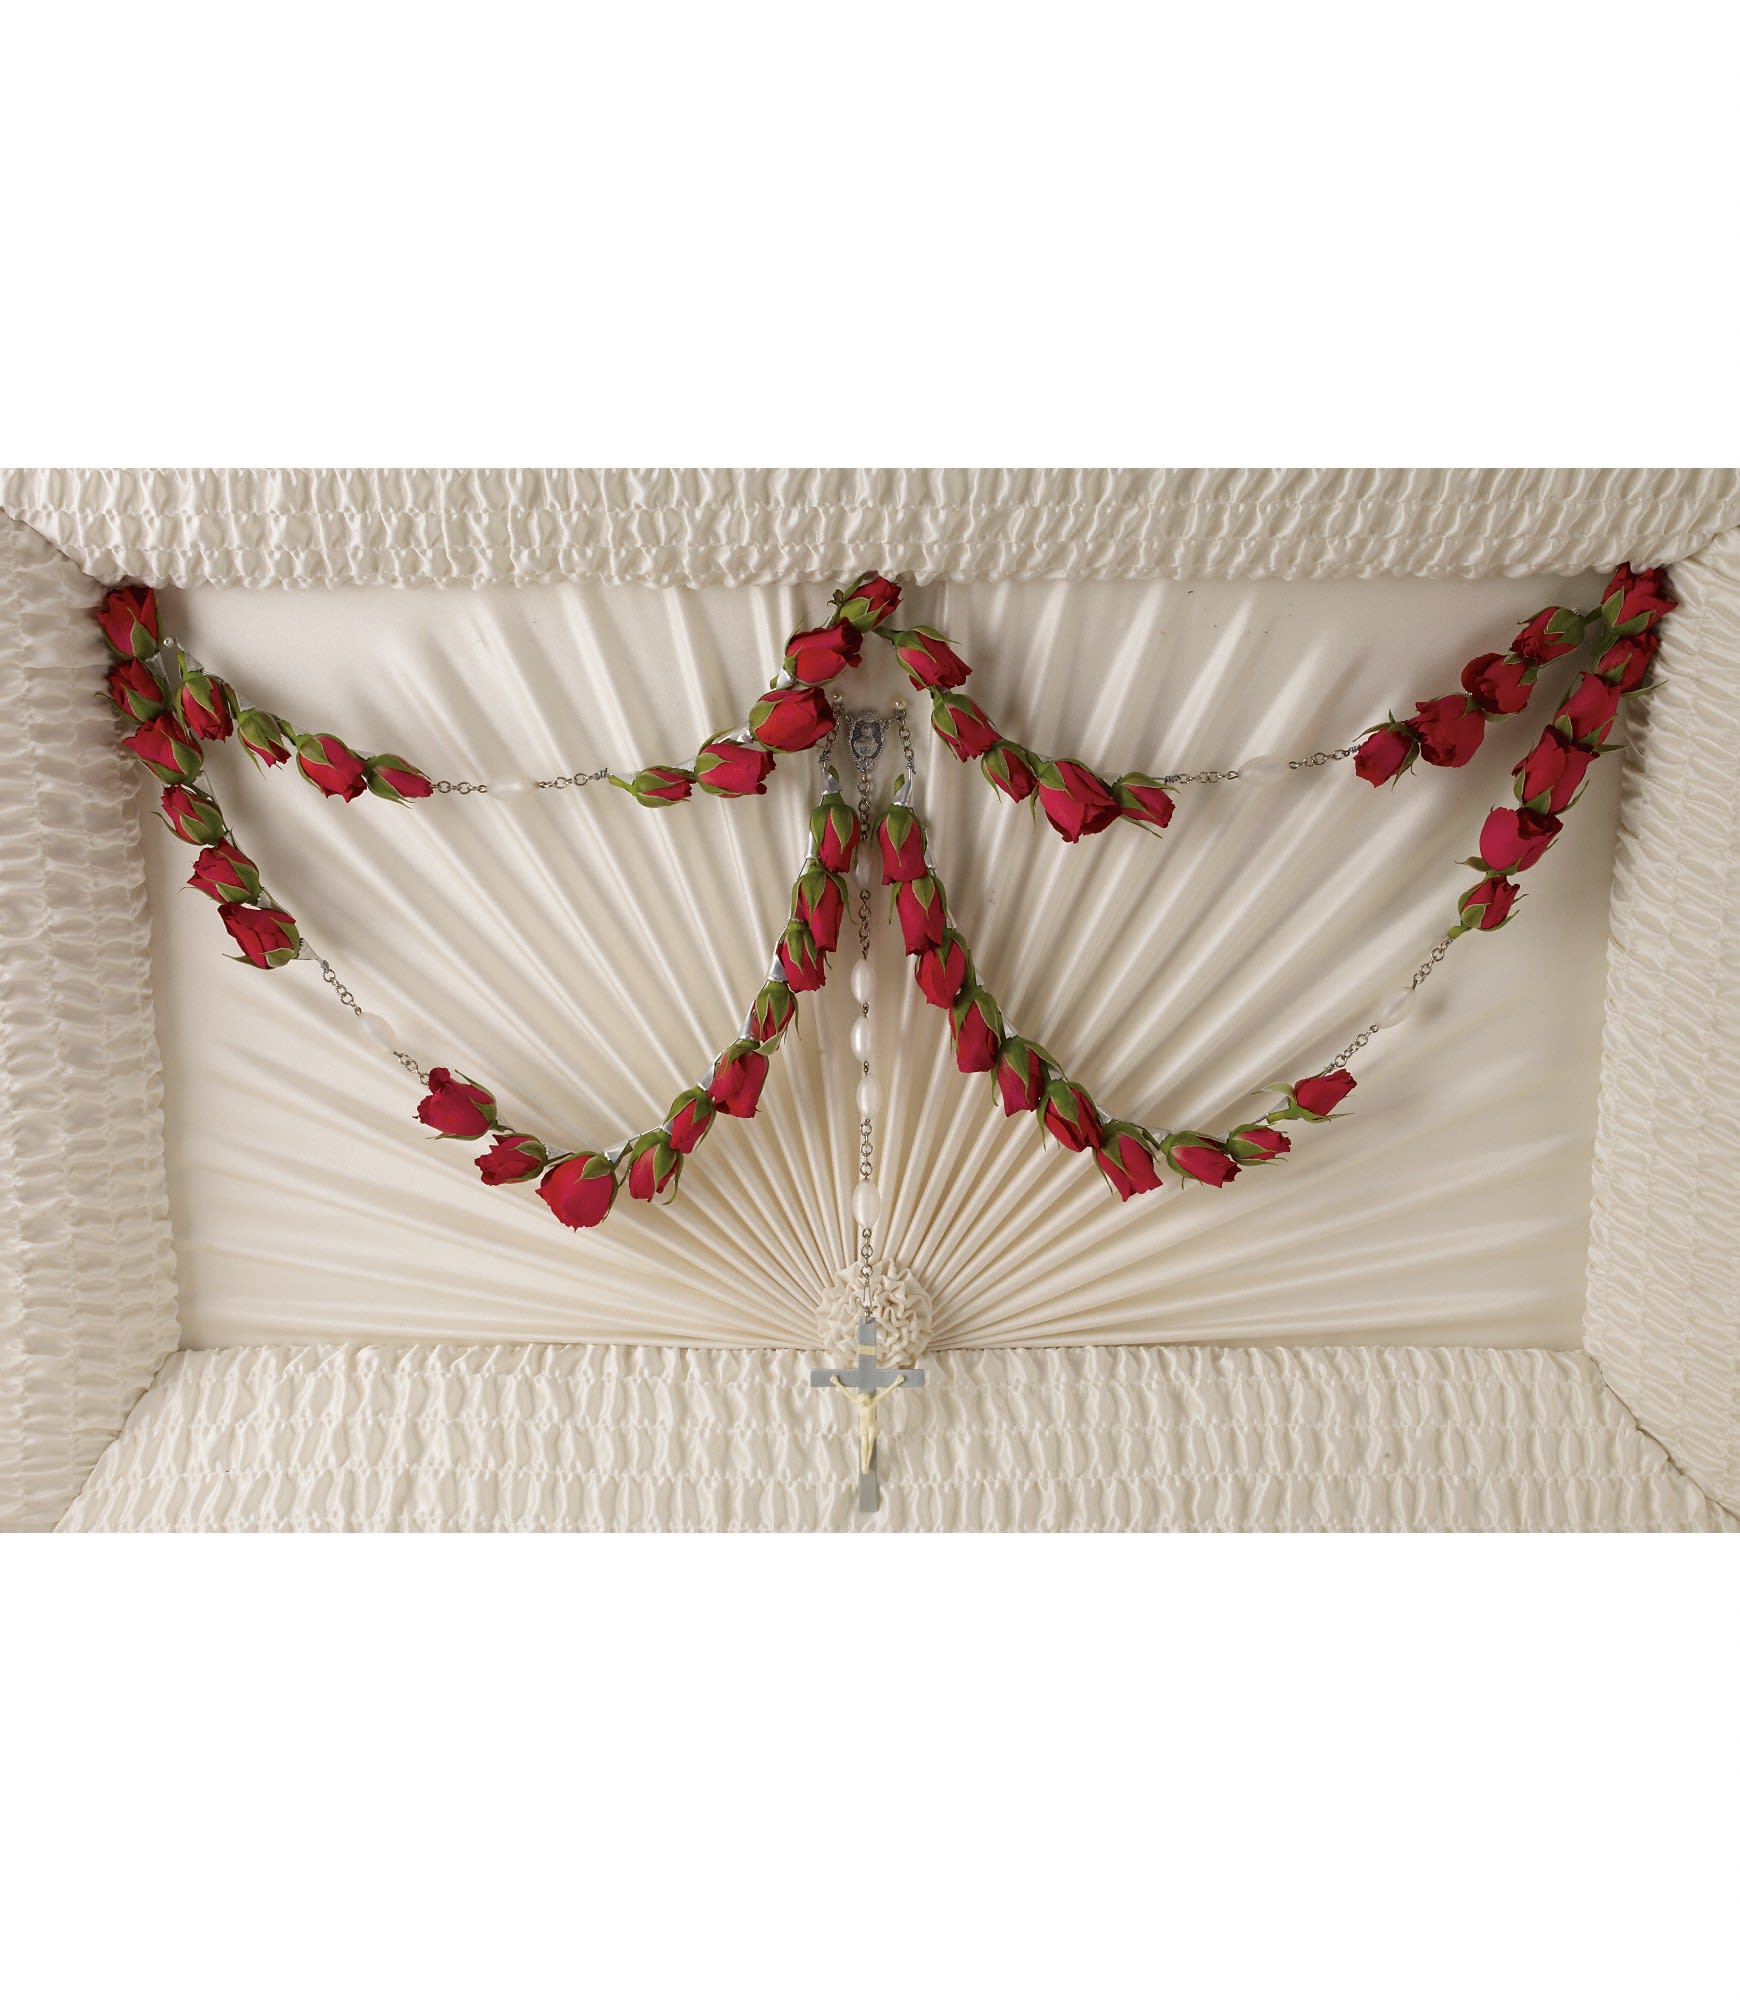 Full Rosary - Mini Red Roses  - For the Catholic service, this full rosary is created with 50 miniature roses and placed in the lid of the casket. 